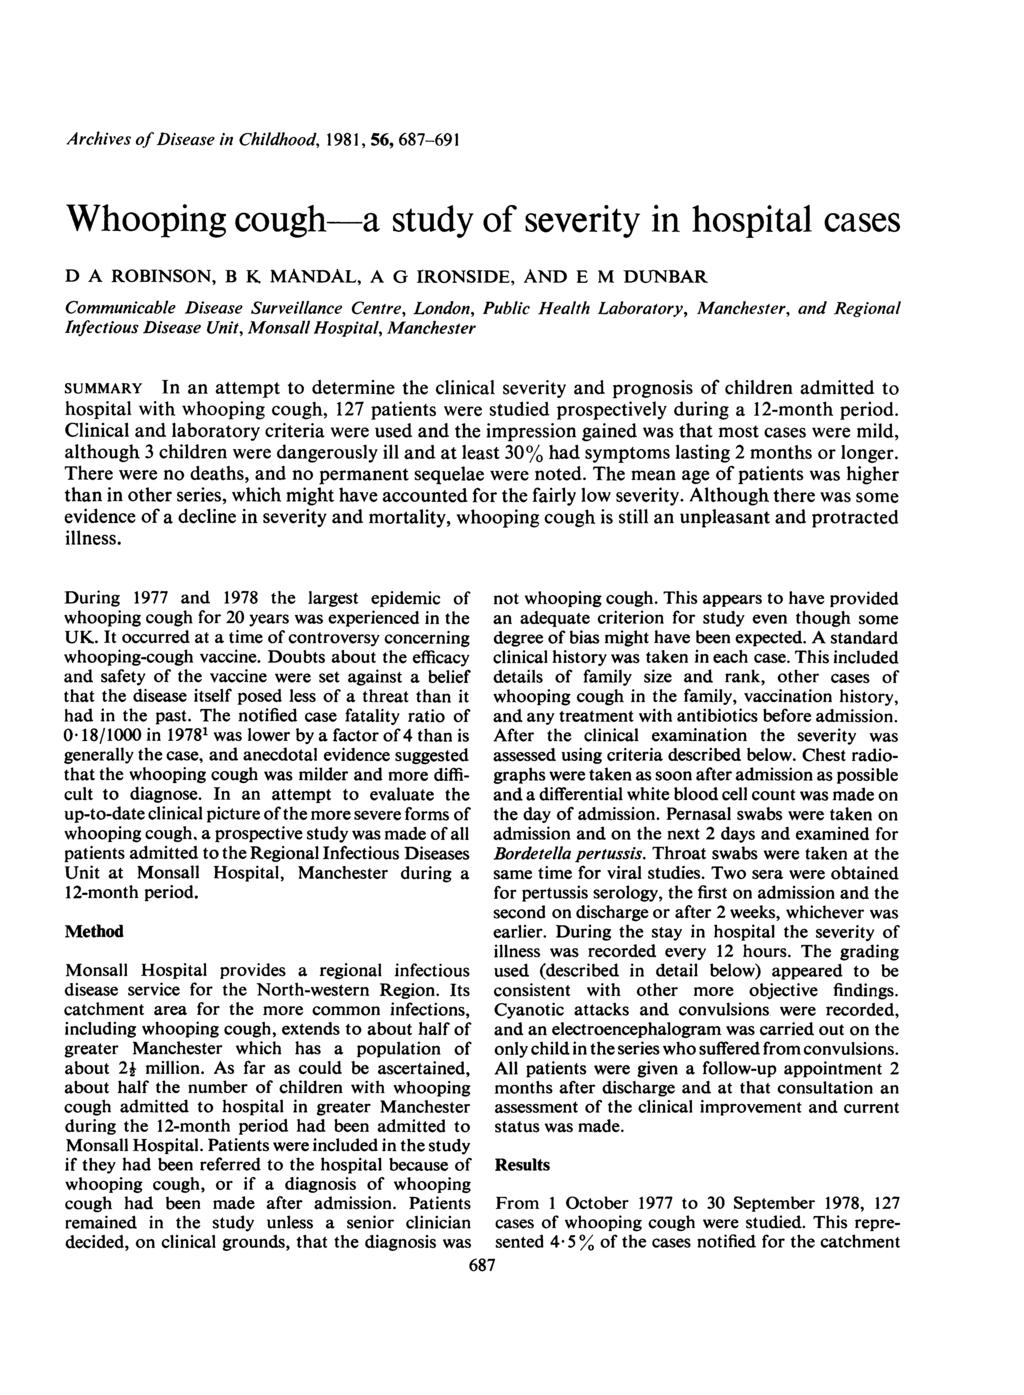 Archives of Disease in Childhood, 1981, 56, 687-691 Whooping cough-a study of severity in hospital cases D A ROBINSON, B K MANDAL, A G IRONSIDE, AND E M DUNBAR Communicable Disease Surveillance